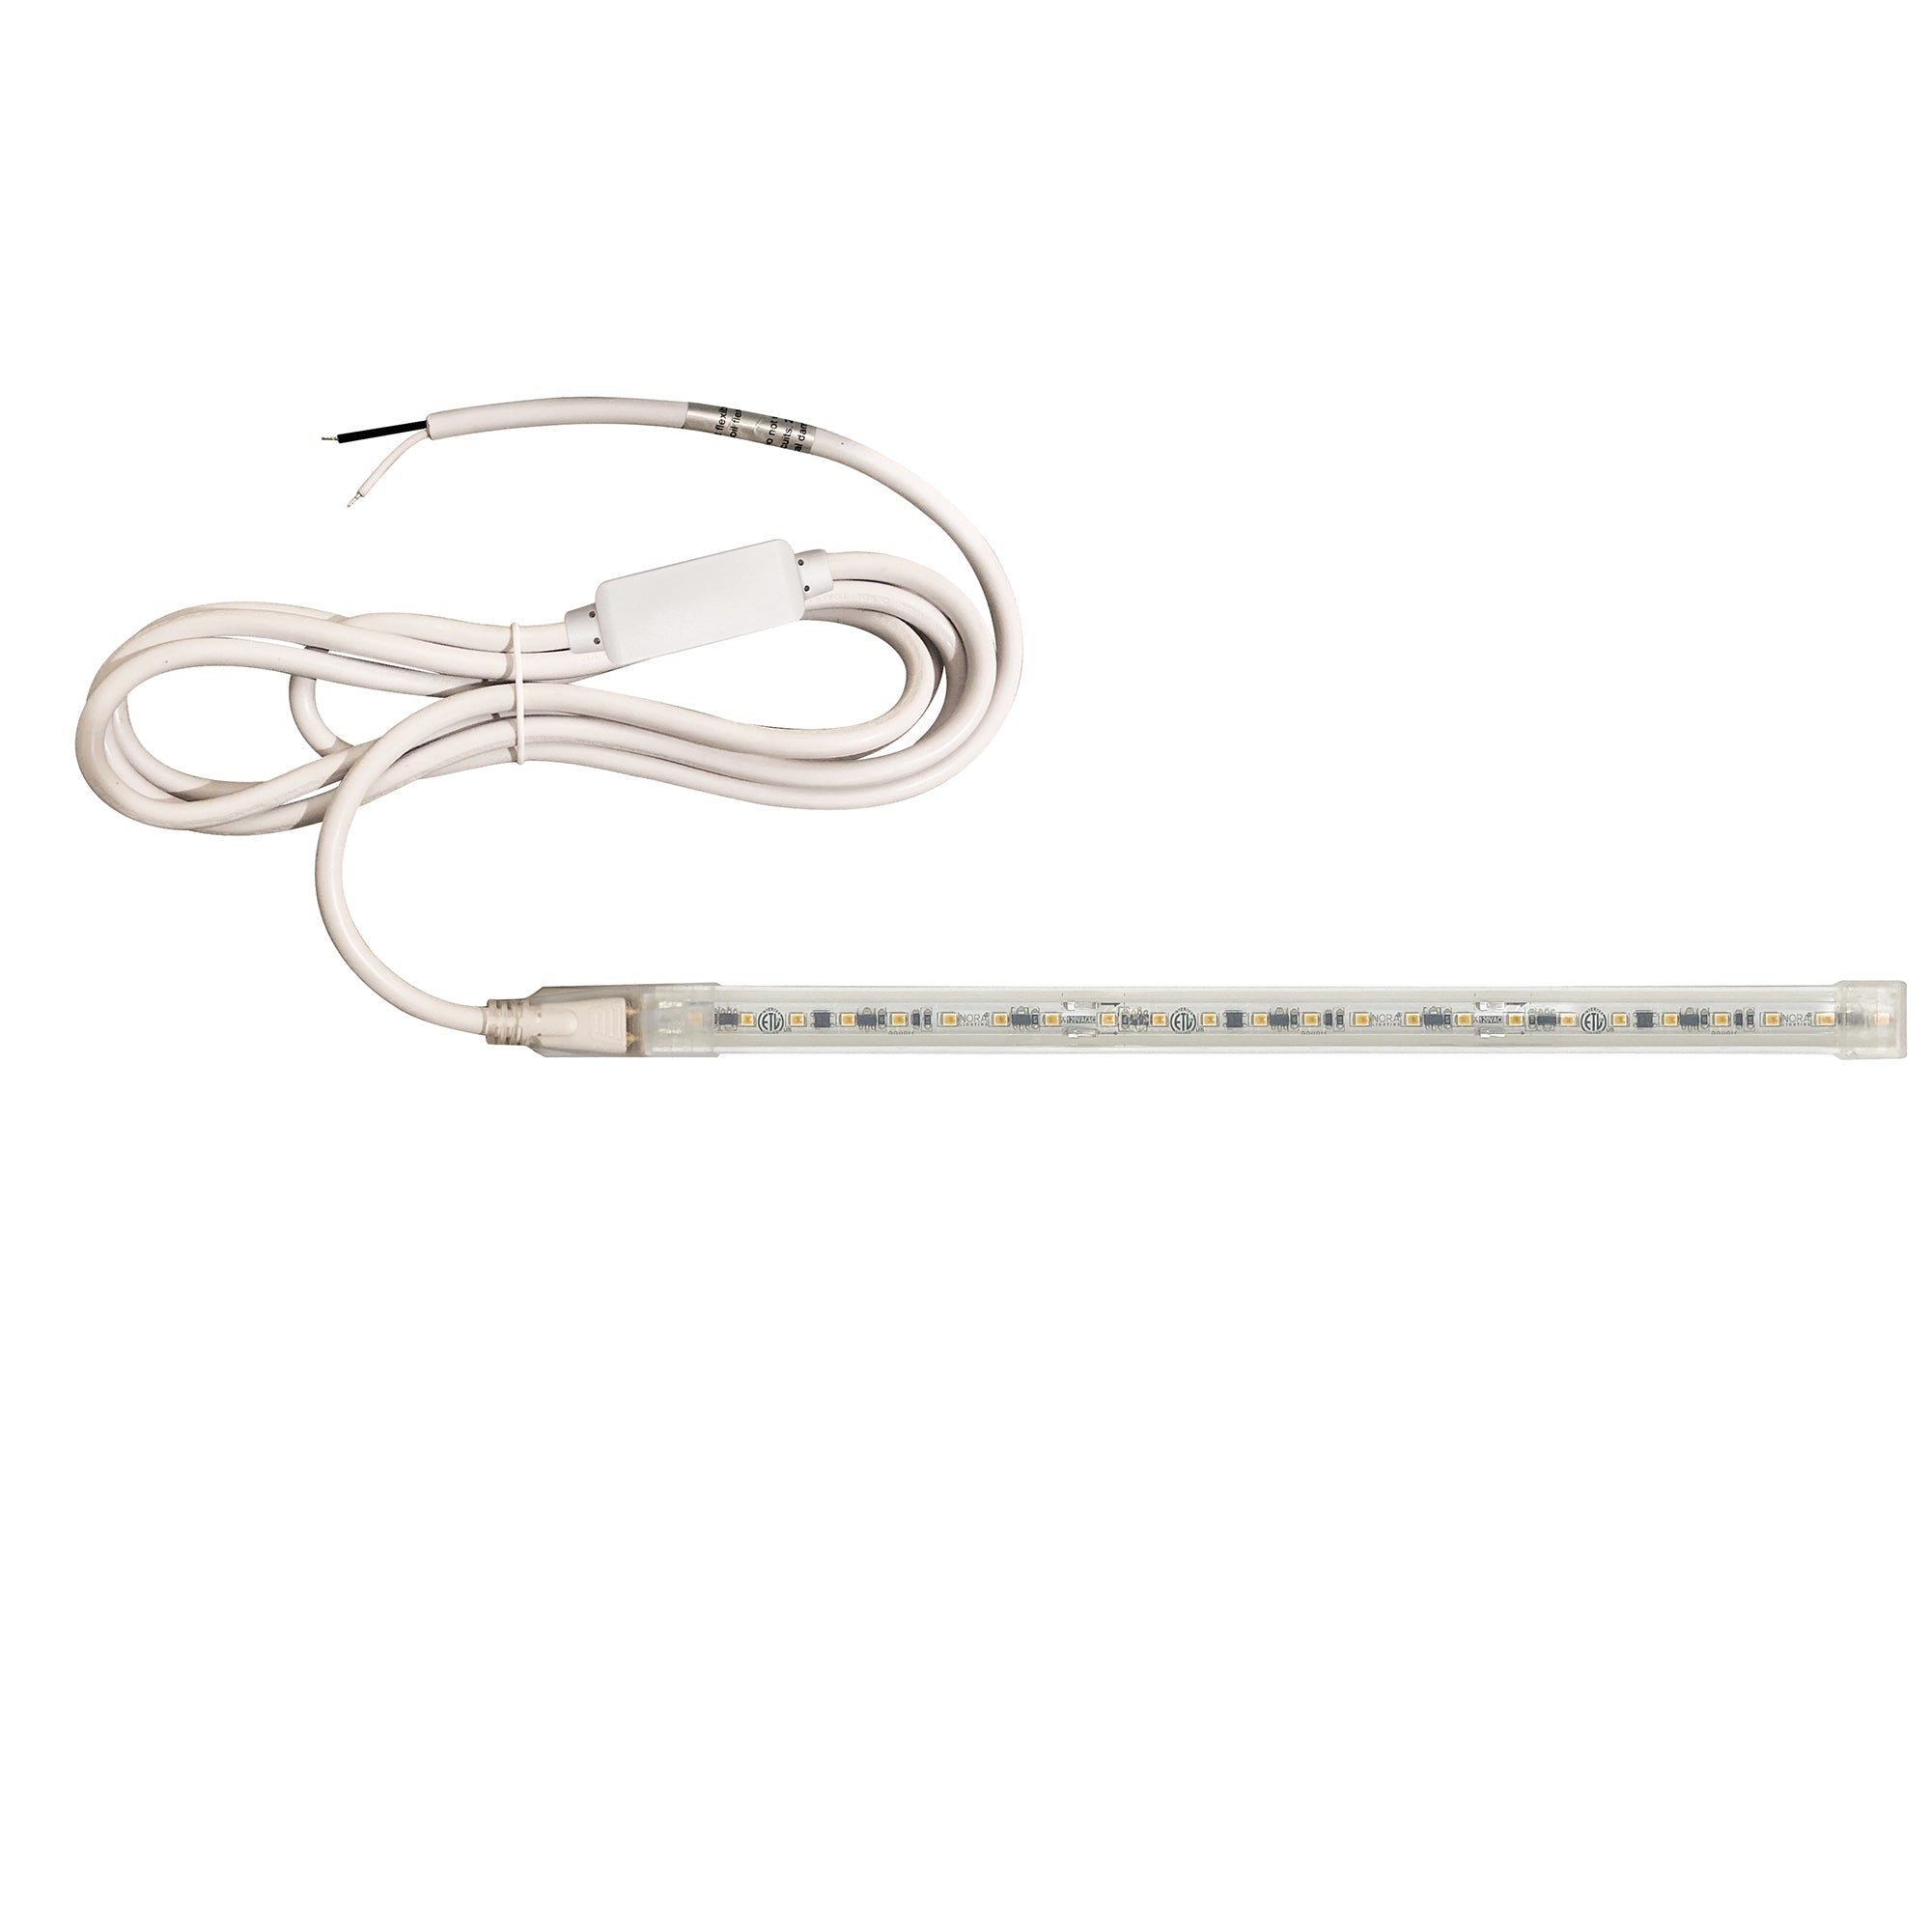 Nora Lighting NUTP13-W108-12-930/HWSP - Accent / Undercabinet - Custom Cut 108-ft 120V Continuous LED Tape Light, 330lm / 3.6W per foot, 3000K, w/ Mounting Clips and 8' Hardwired Power Cord w/ Surge Protector